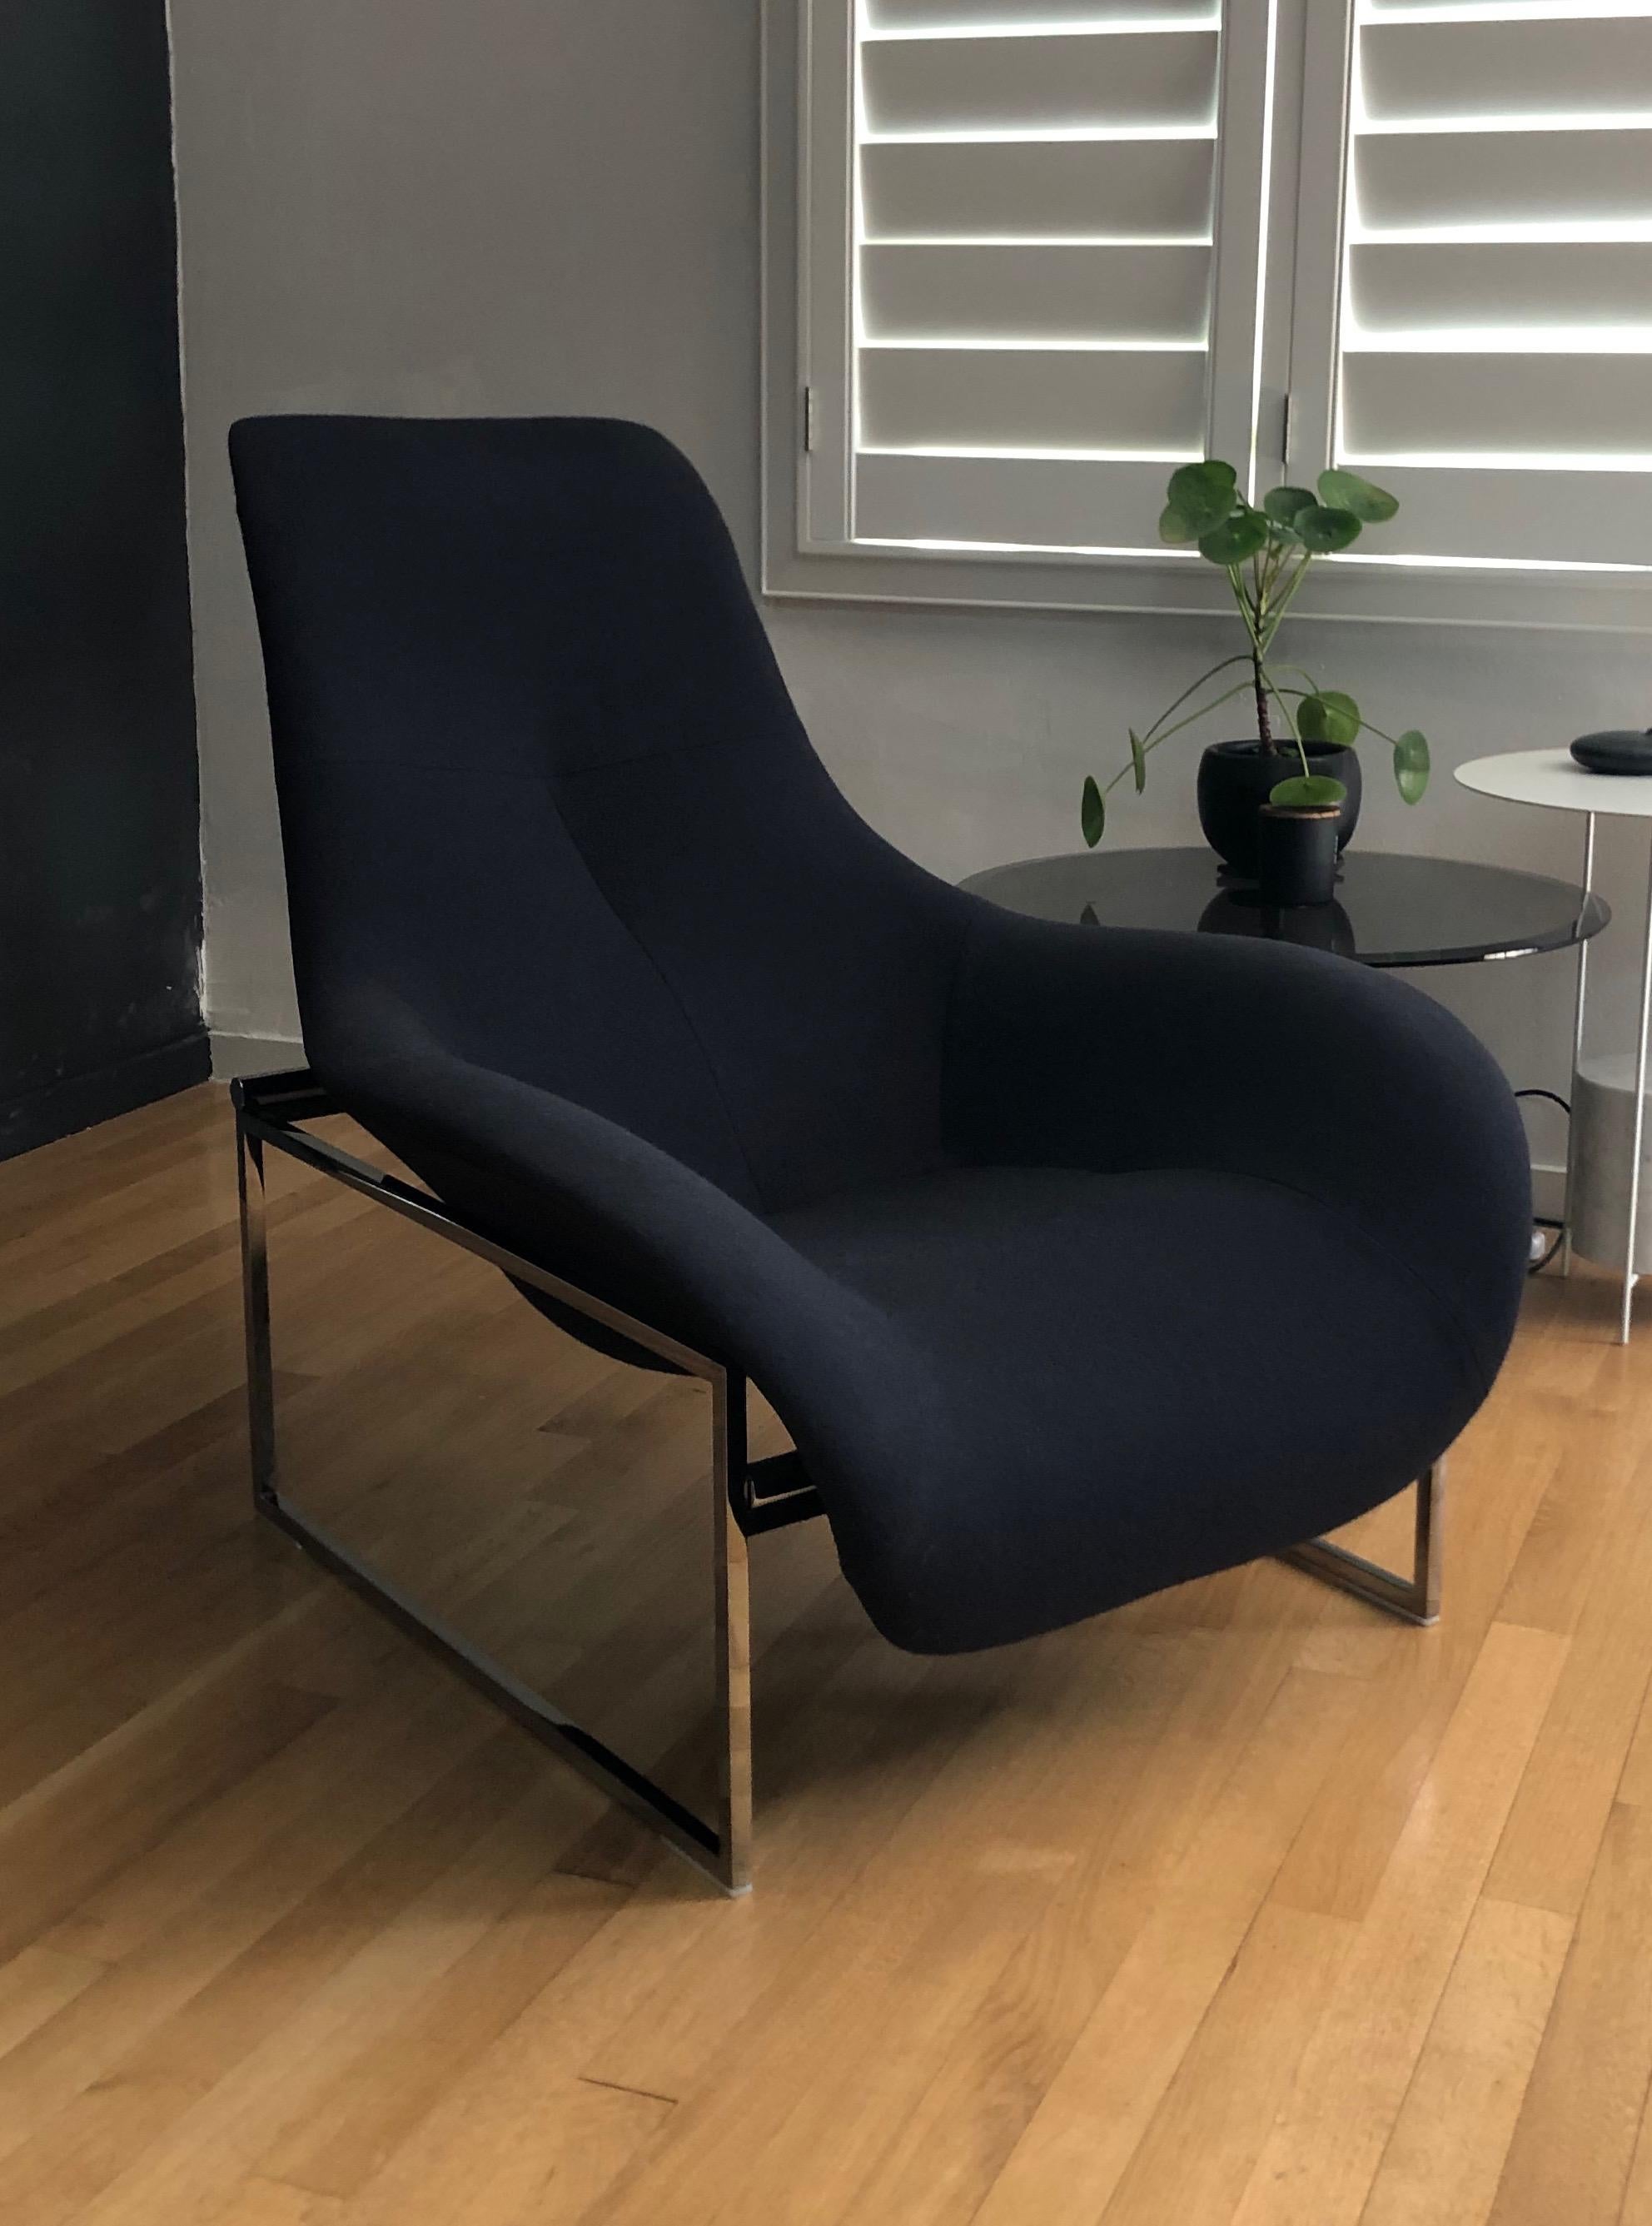 Beautifully sleek and sculptural B&B Italia adjustable lounge by Antonio Citterio. Covered in charcoal wool hopsack fabric with polished chrome base. Has two seating positions: upright and reclining. Extremely comfortable and minimal design.